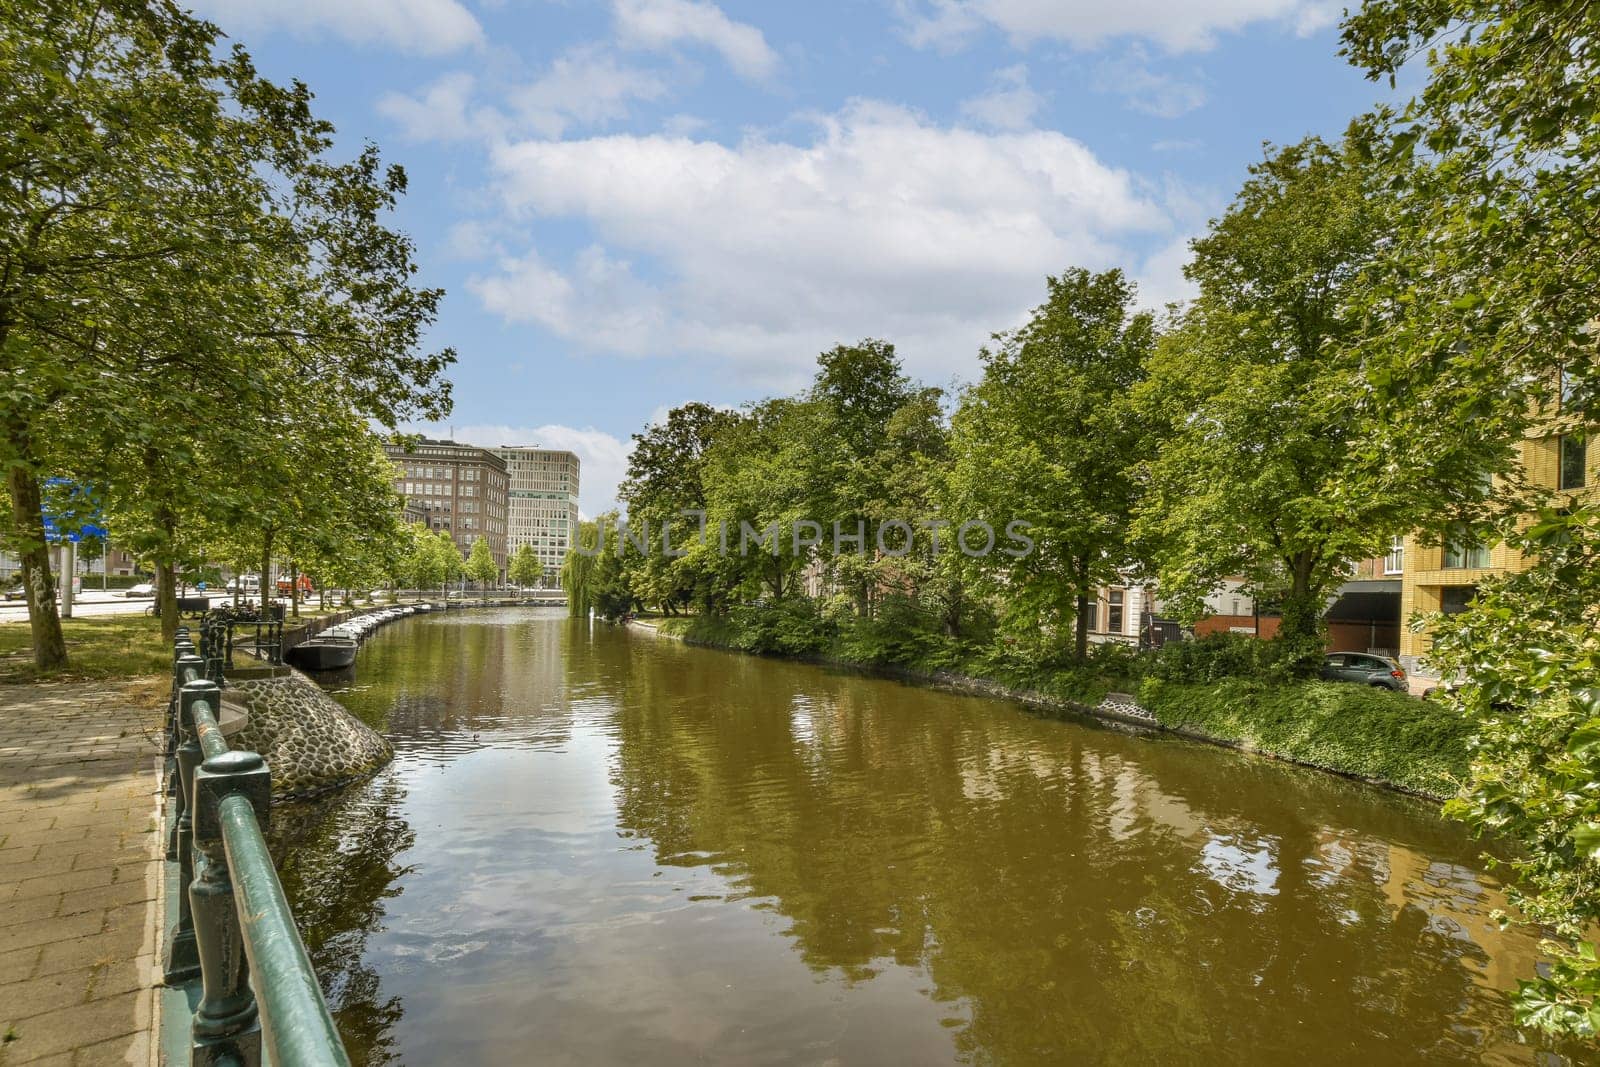 a canal with trees and buildings in the background, taken from a bridge over the water's edge on a sunny day